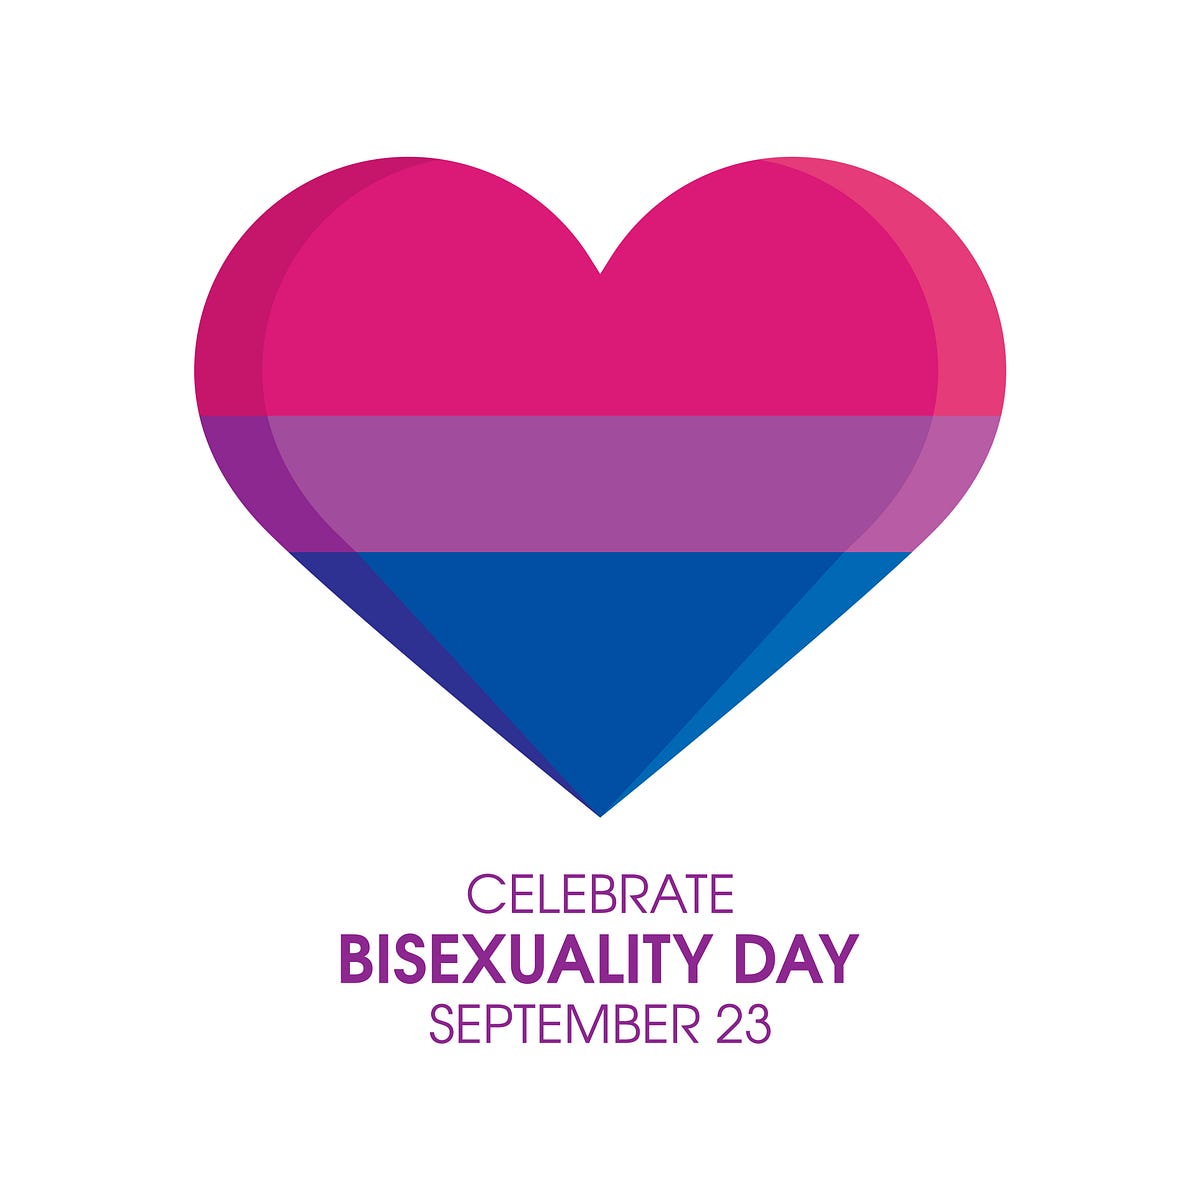 Happy Celebrate Bisexuality Day! Im Coming Out by Wynn Hausser Medium Medium